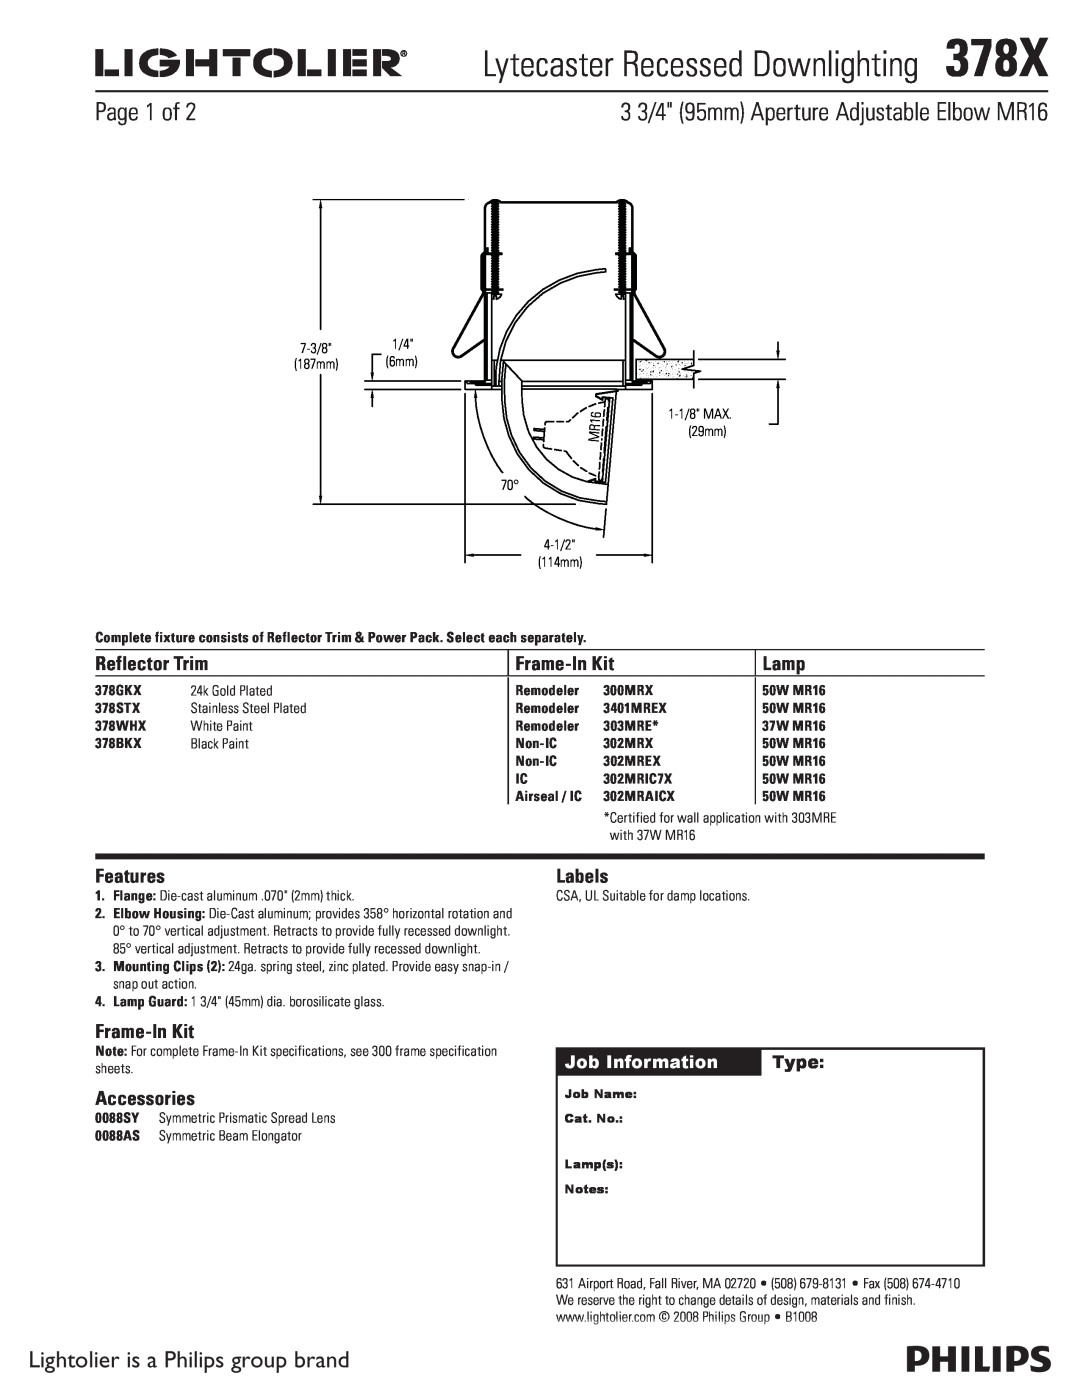 Lightolier specifications Lytecaster Recessed Downlighting378X, 3 3/4 95mm Aperture Adjustable Elbow MR16, Page 1 of 